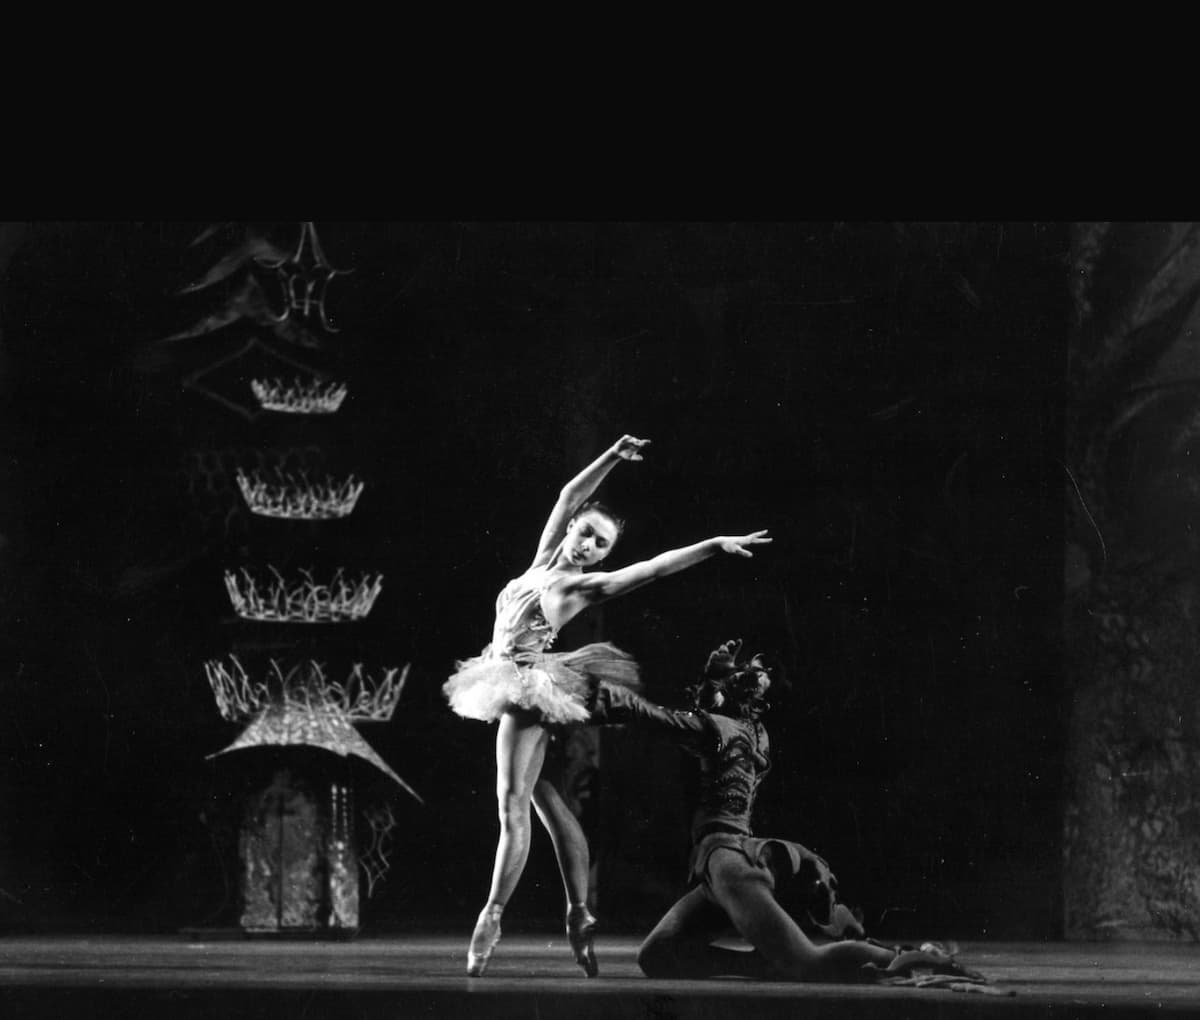 Svetlana Beriosova as The Princess Belle Rose and David Blair as The Green Salamander in the Sadler's Wells Ballet production of The Prince of the Pagodas, 1957 (Royal Opera House Covent Garden) (Photo by Roger Wood)